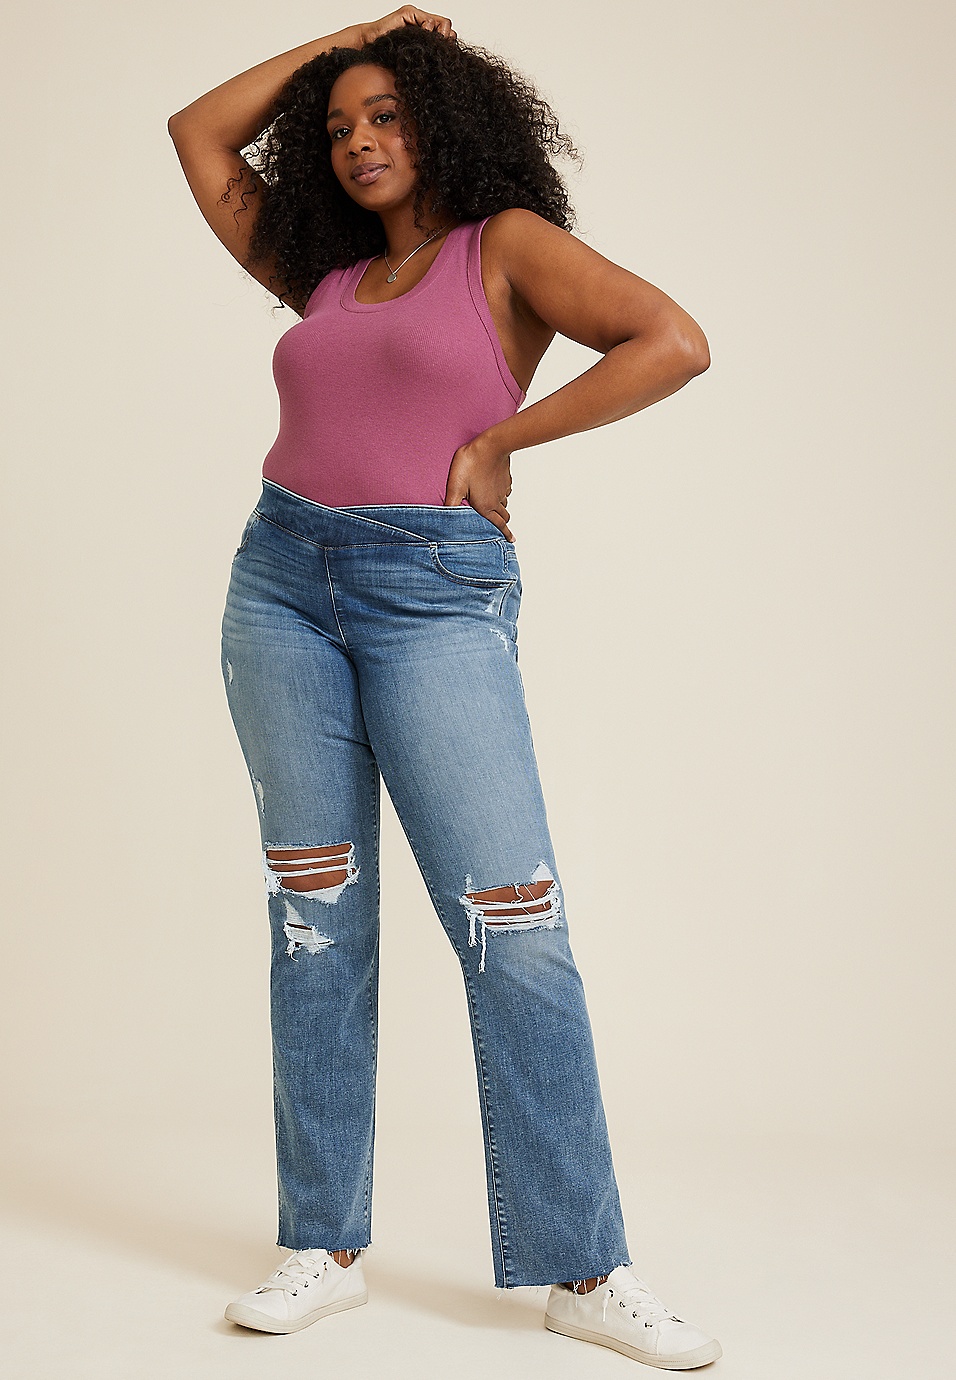 Plus Size Mom Jeans, Women's High Waisted Mom Jeans